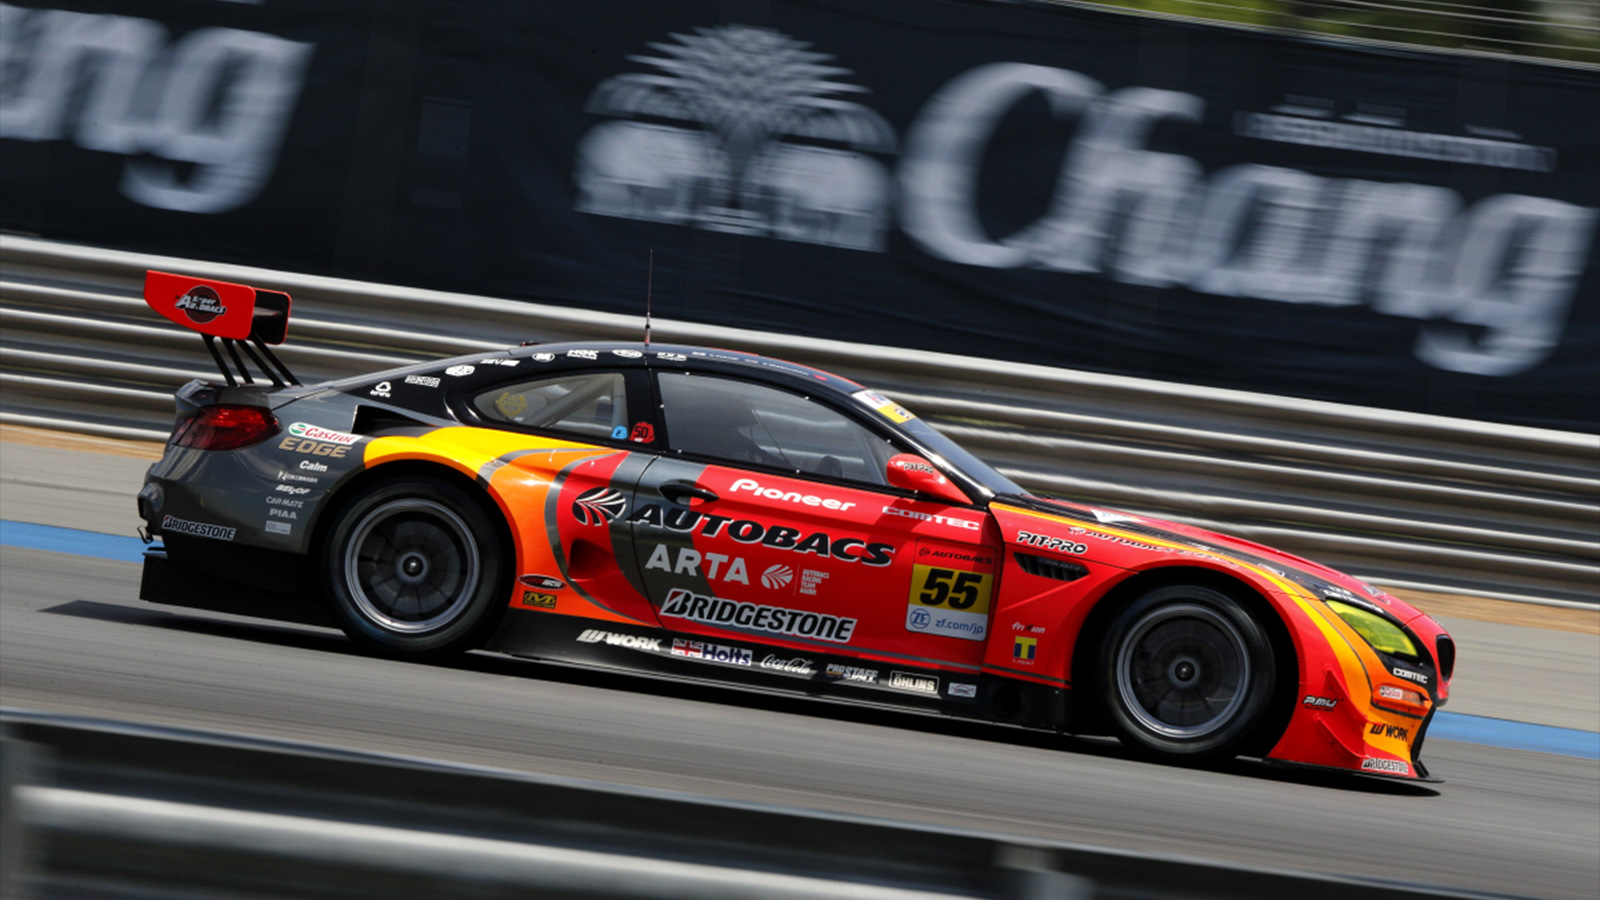 Big points and consistency the target for GT300 points leader.